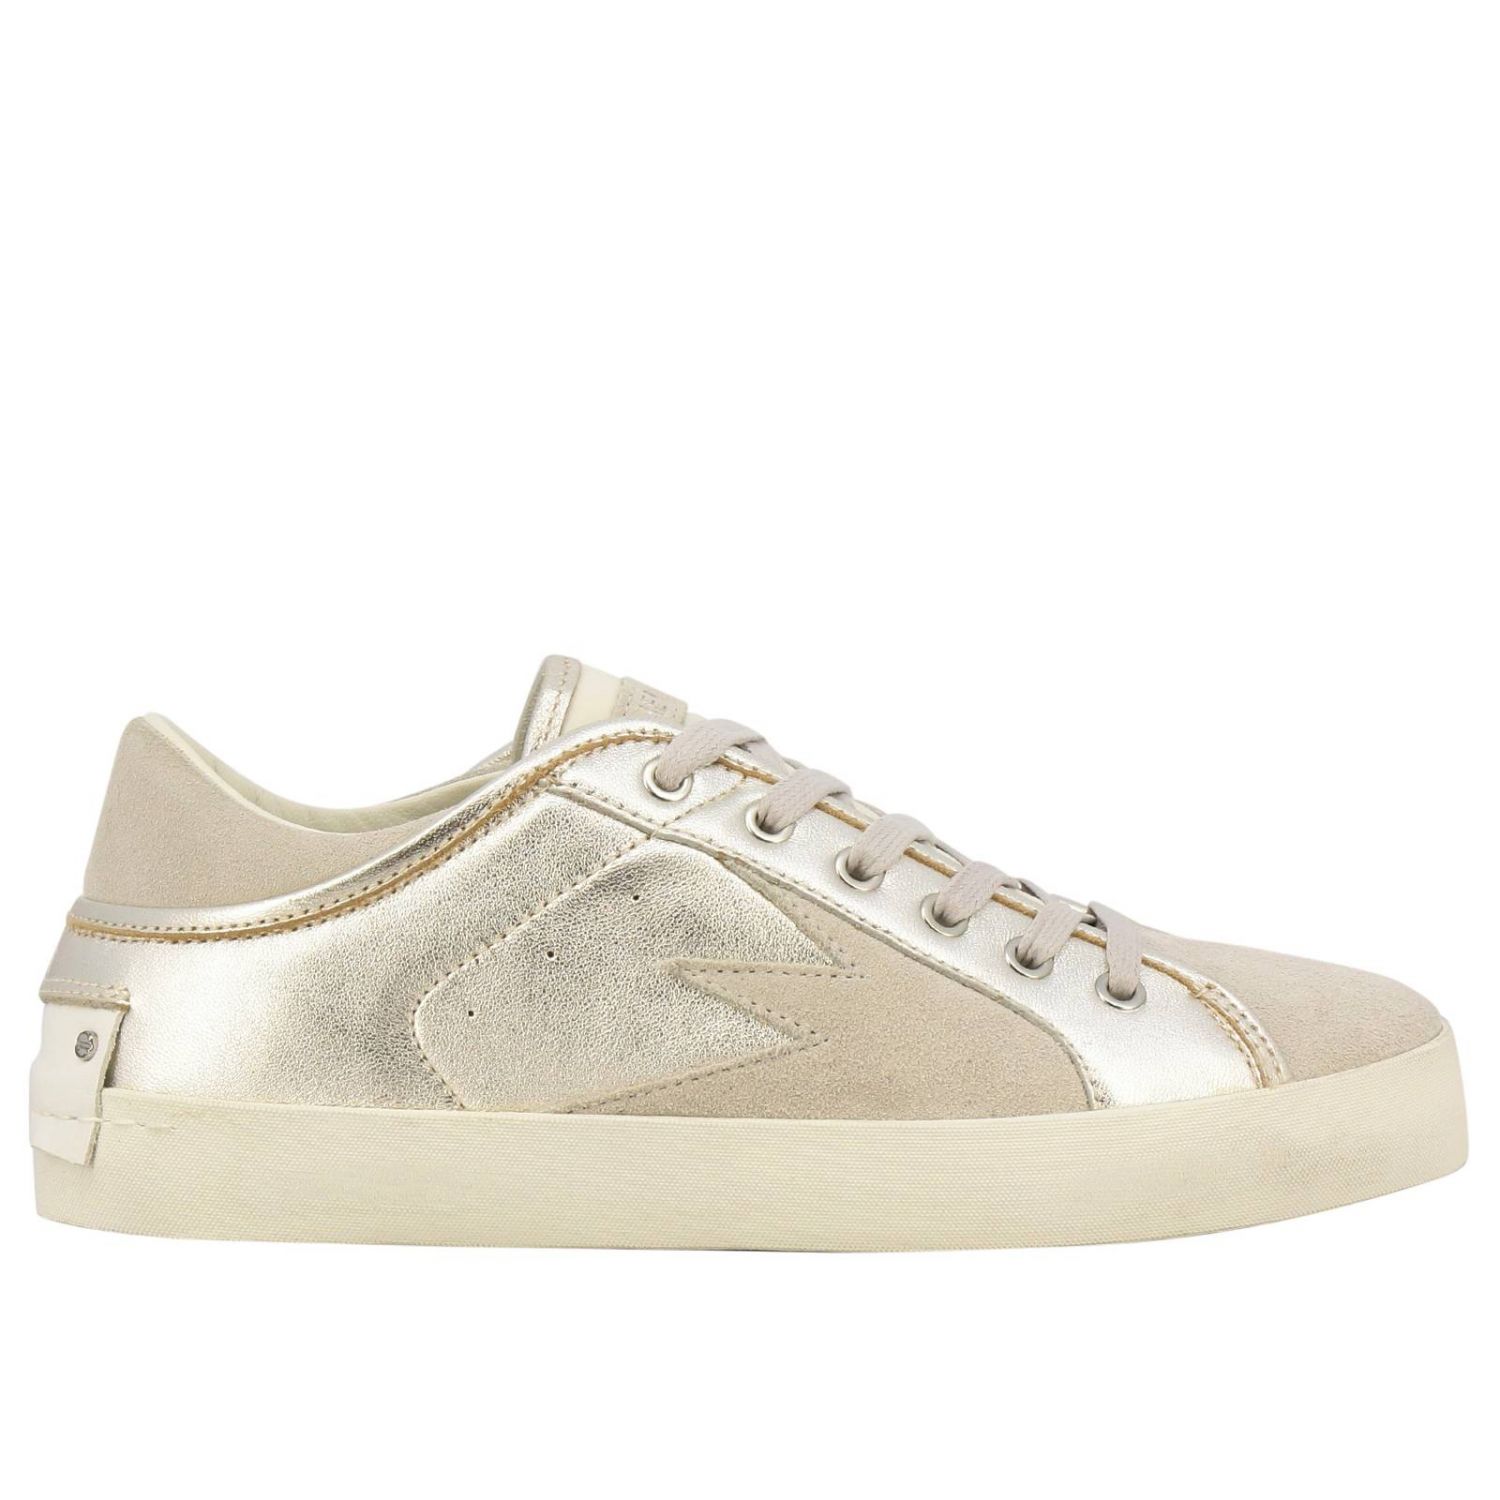 Crime London Outlet: sneakers for women - Silver | Crime London ...